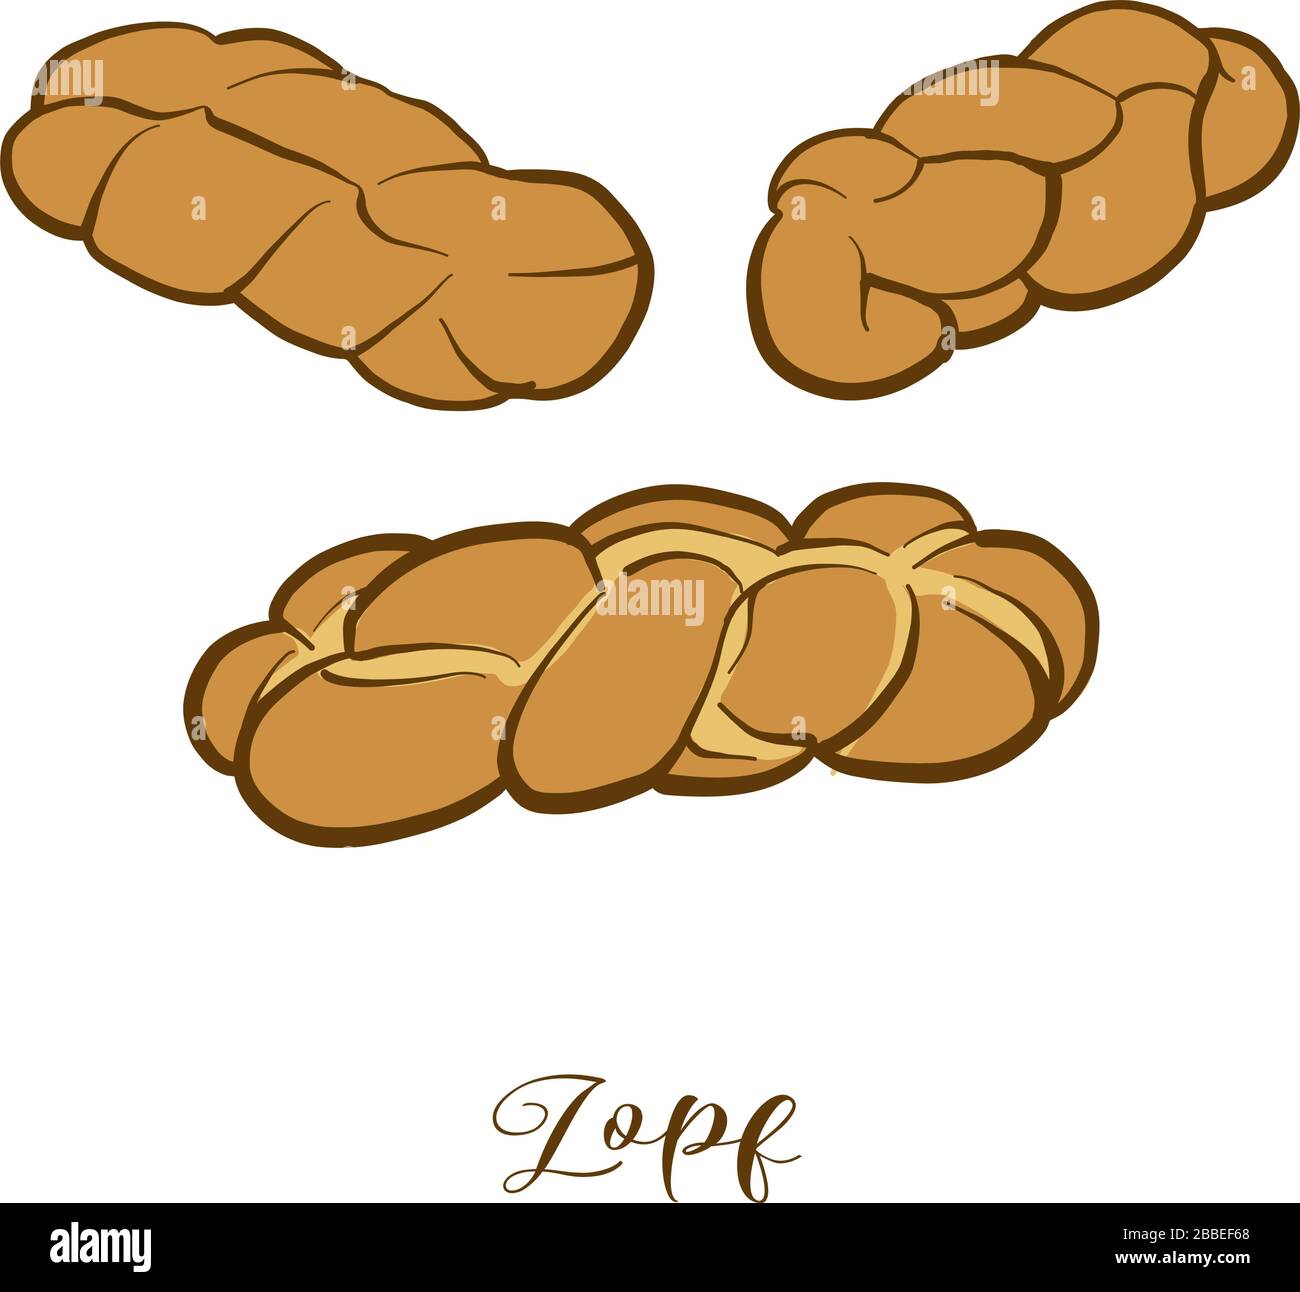 Colored drawing of Zopf bread. Vector illustration of Leavened, White food, usually known in Switzerland, Germany. Colored Bread sketches. Stock Vector